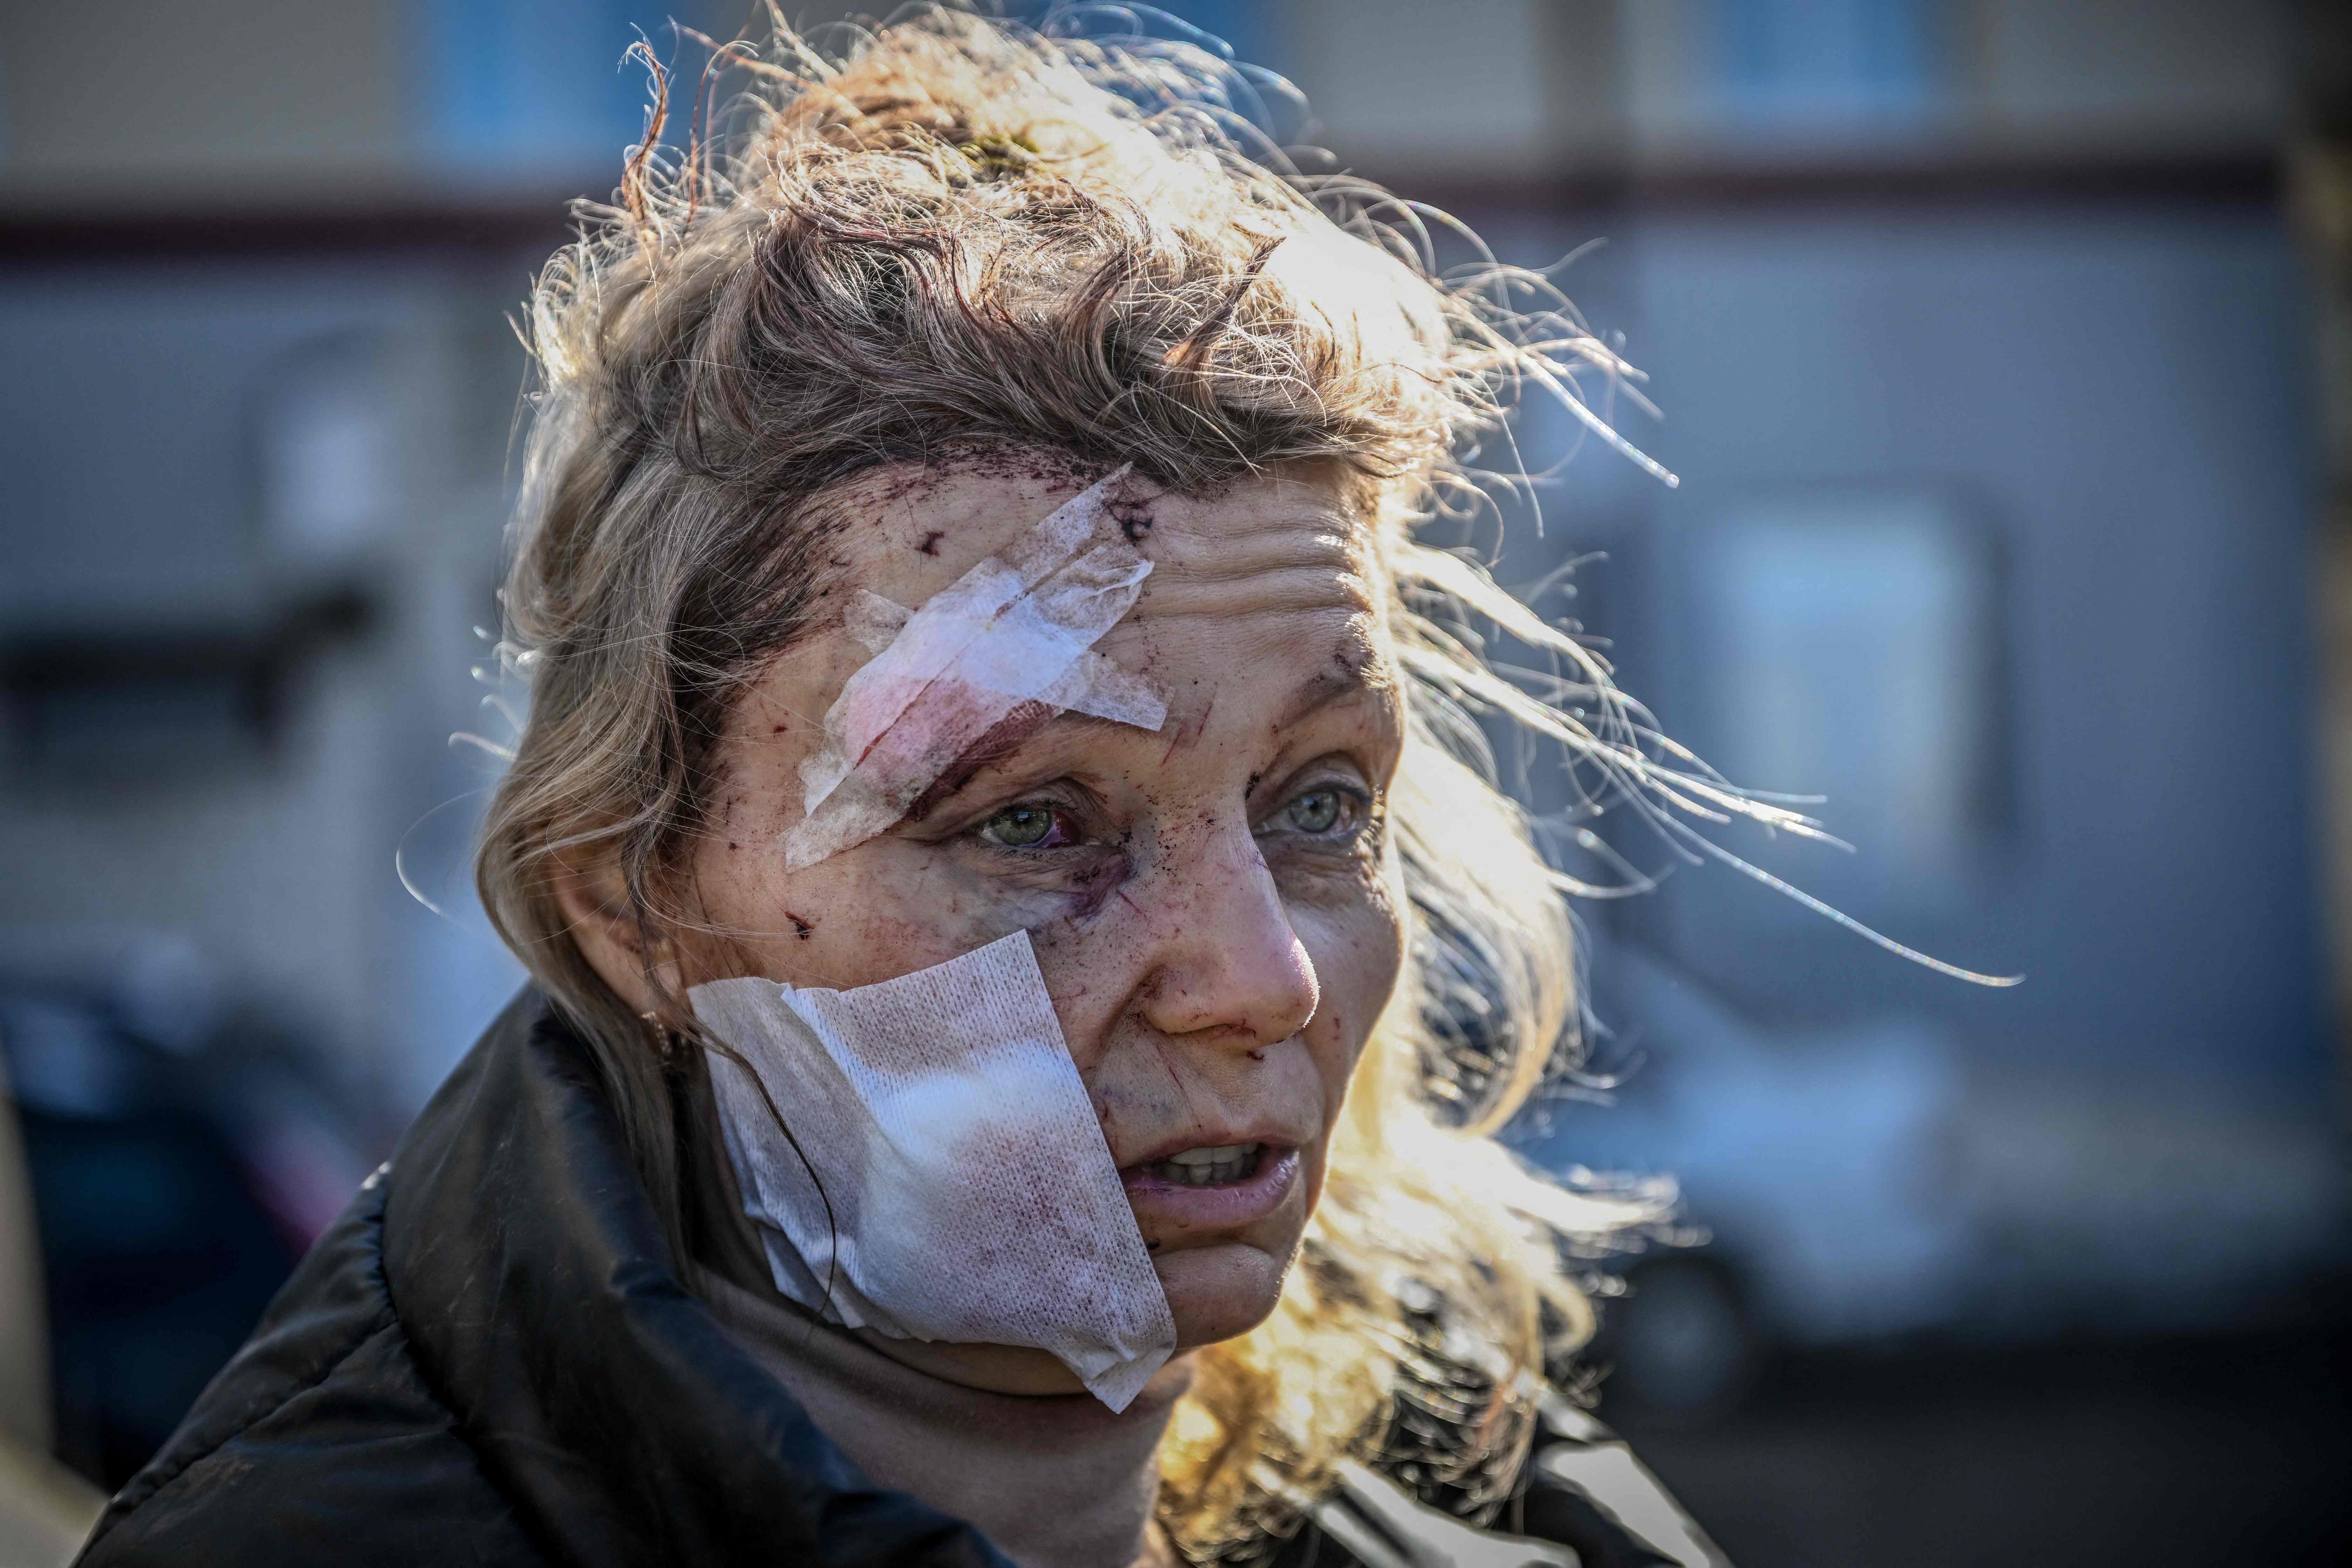 A wounded woman at a hospital in Chuguiv, eastern Ukraine